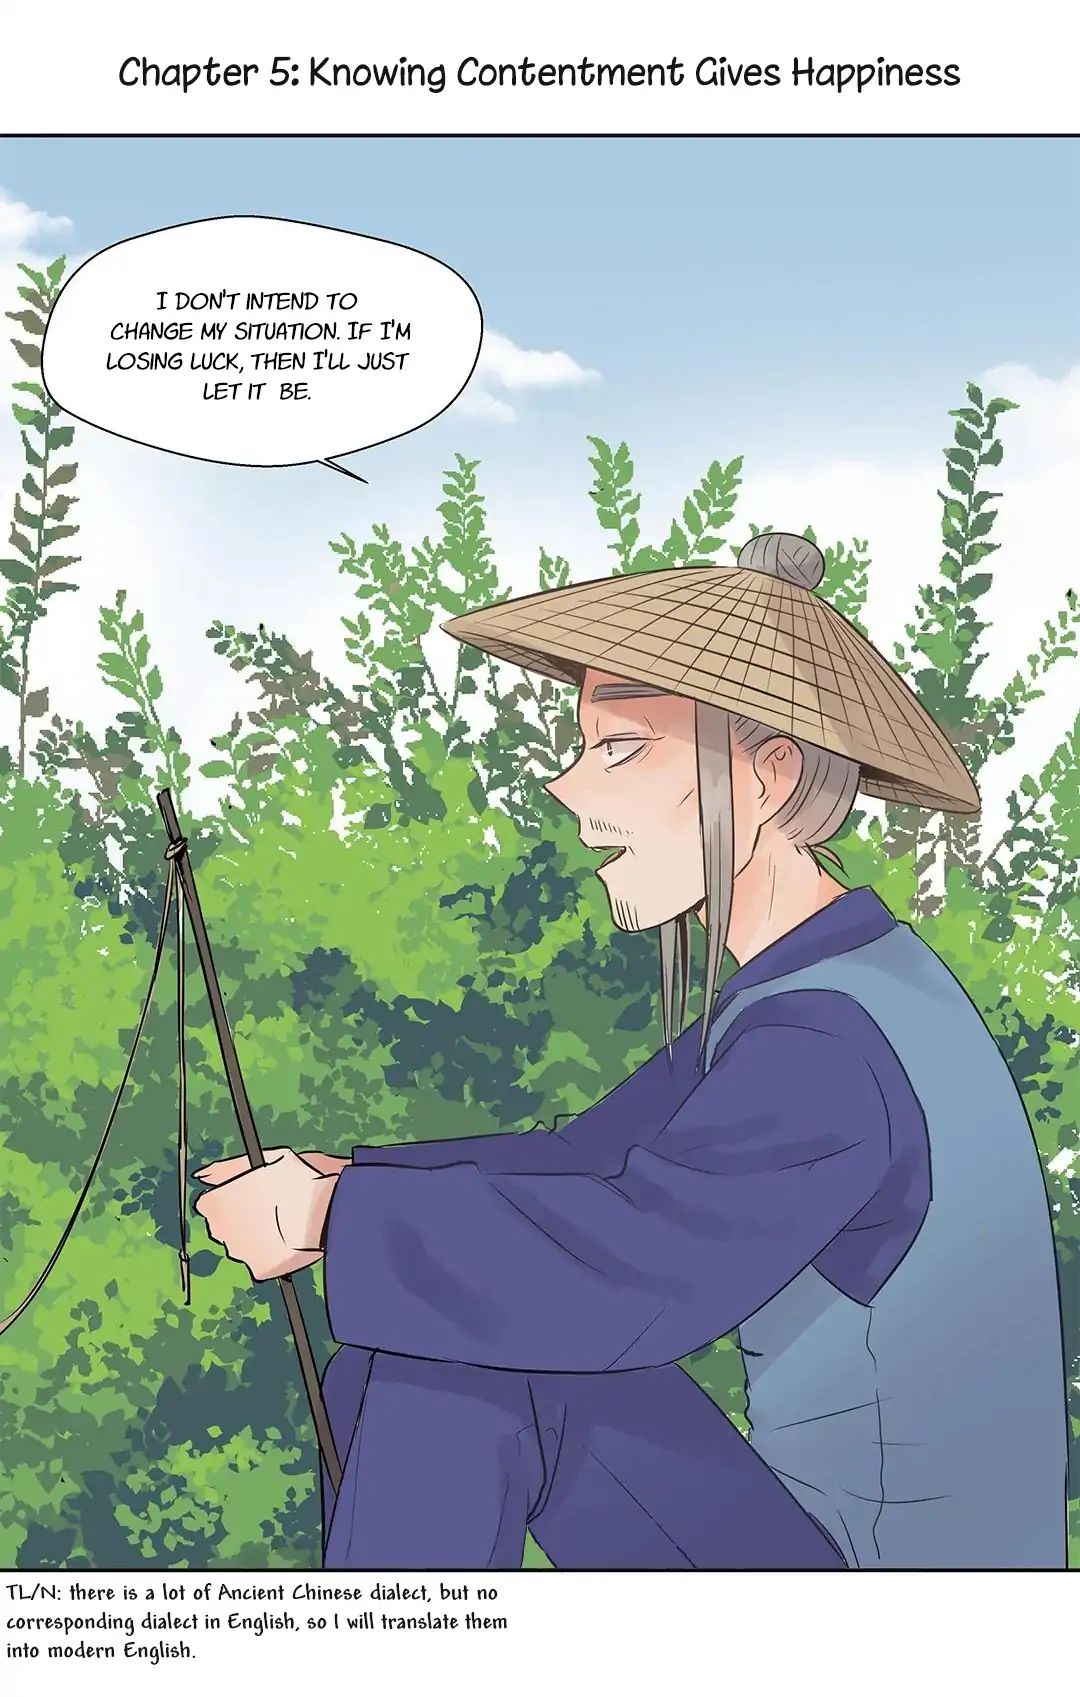 A Gust Of Wind Blows At Daybreak Chapter 5 Page 1